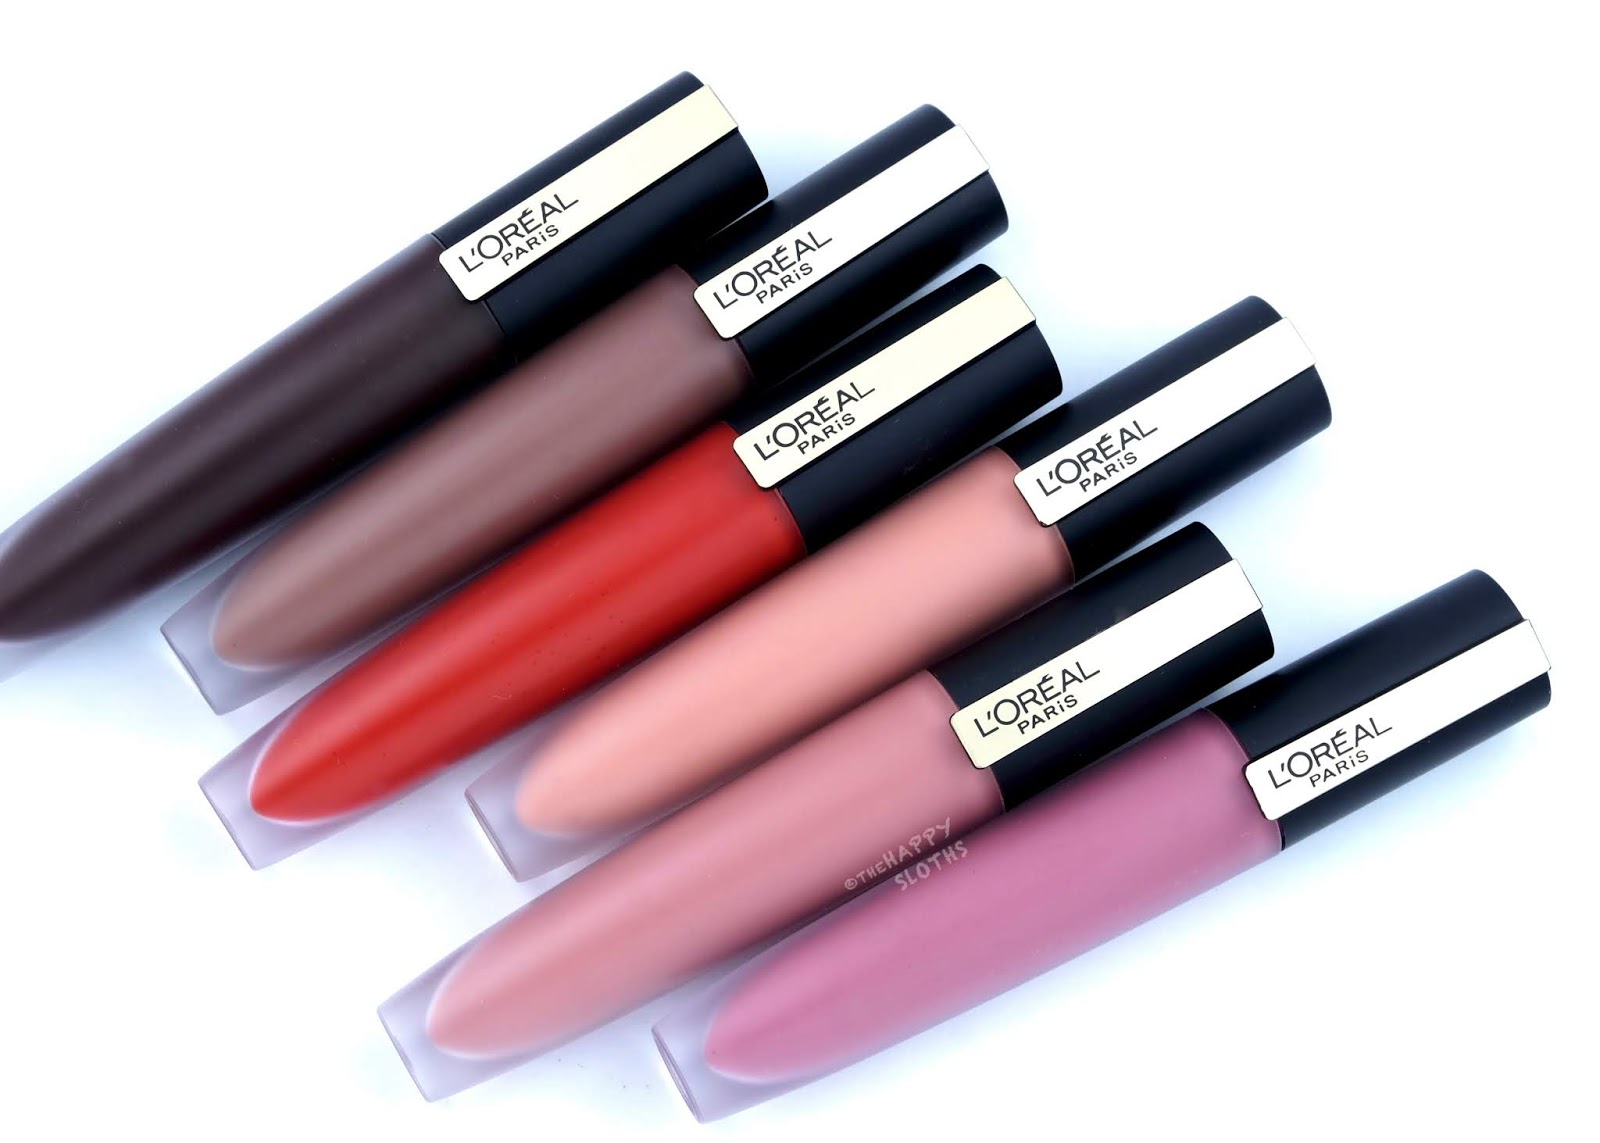 L'Oreal | Rouge Signature Matte Liquid Lipstick: Review and Swatches